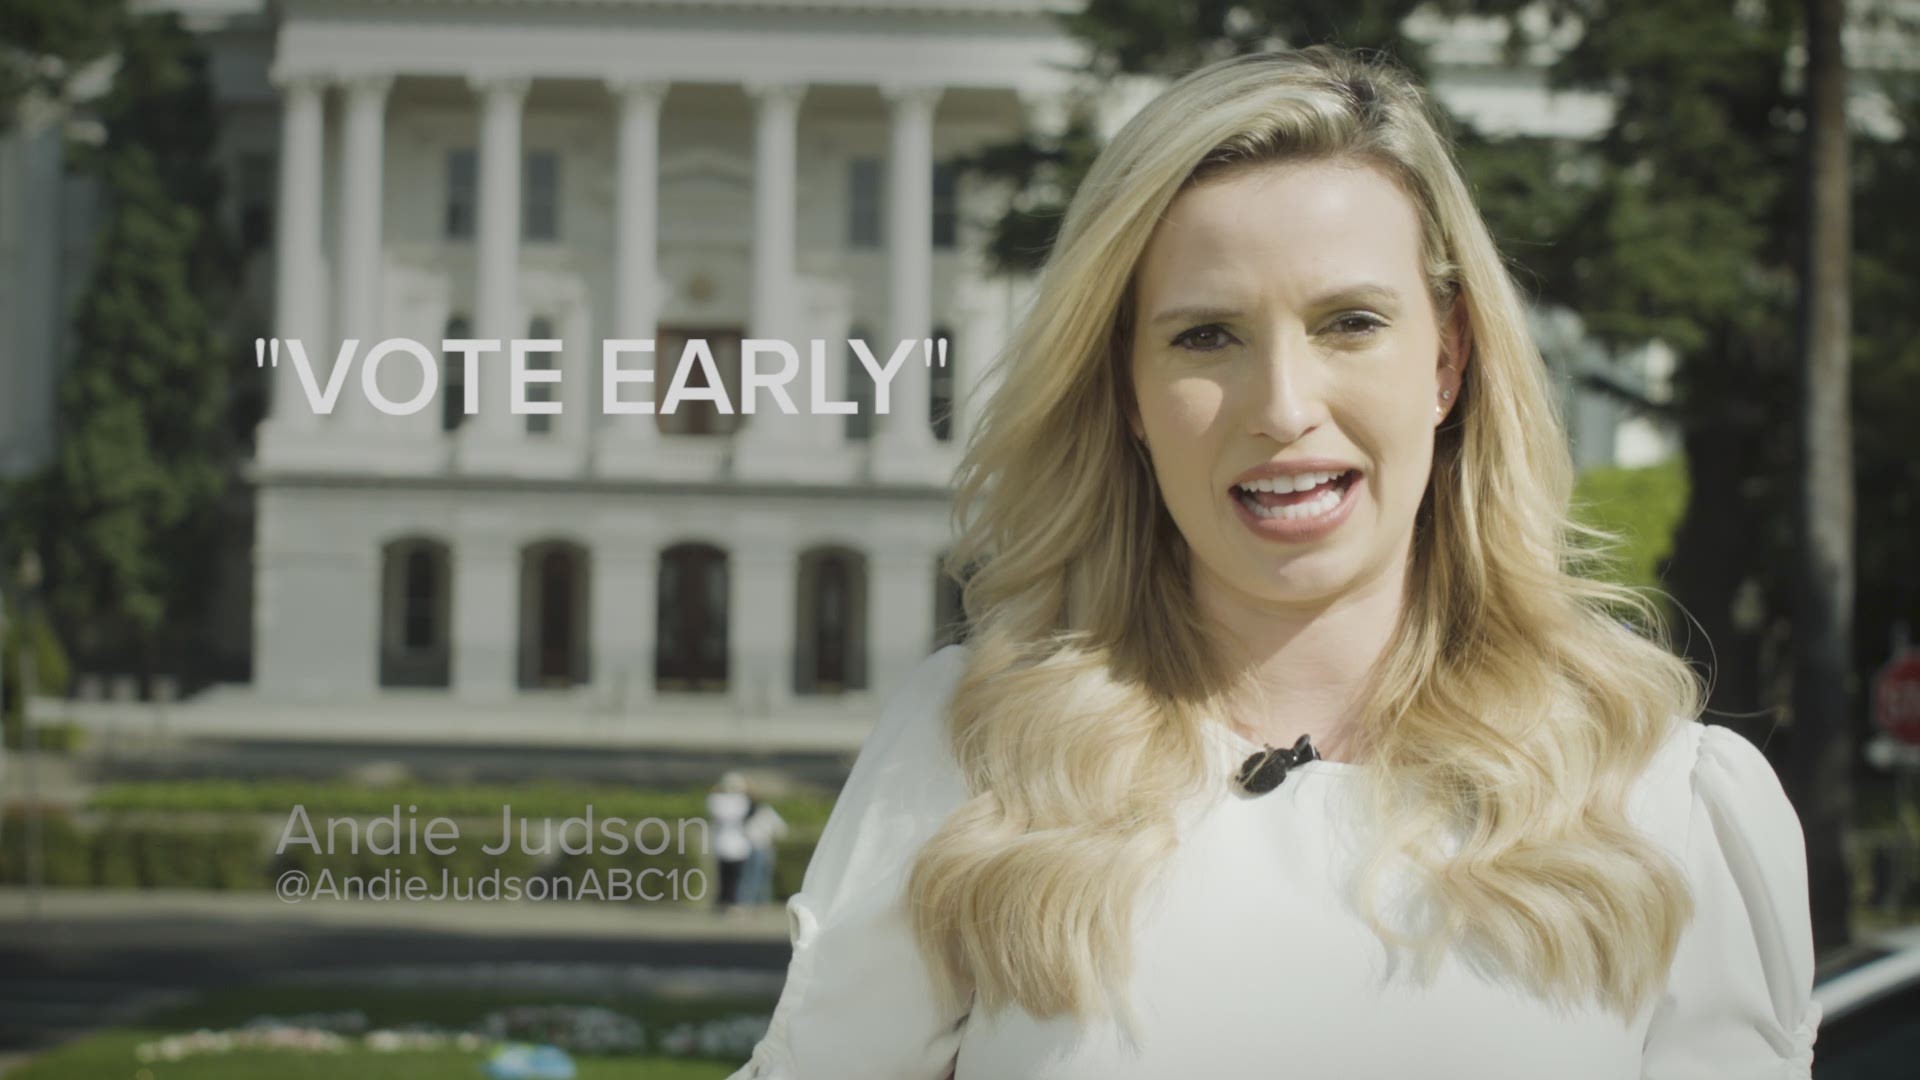 The term “vote early” has been sung repeatedly this election season, but when exactly is that? We compiled a list of all the dates you need to know.